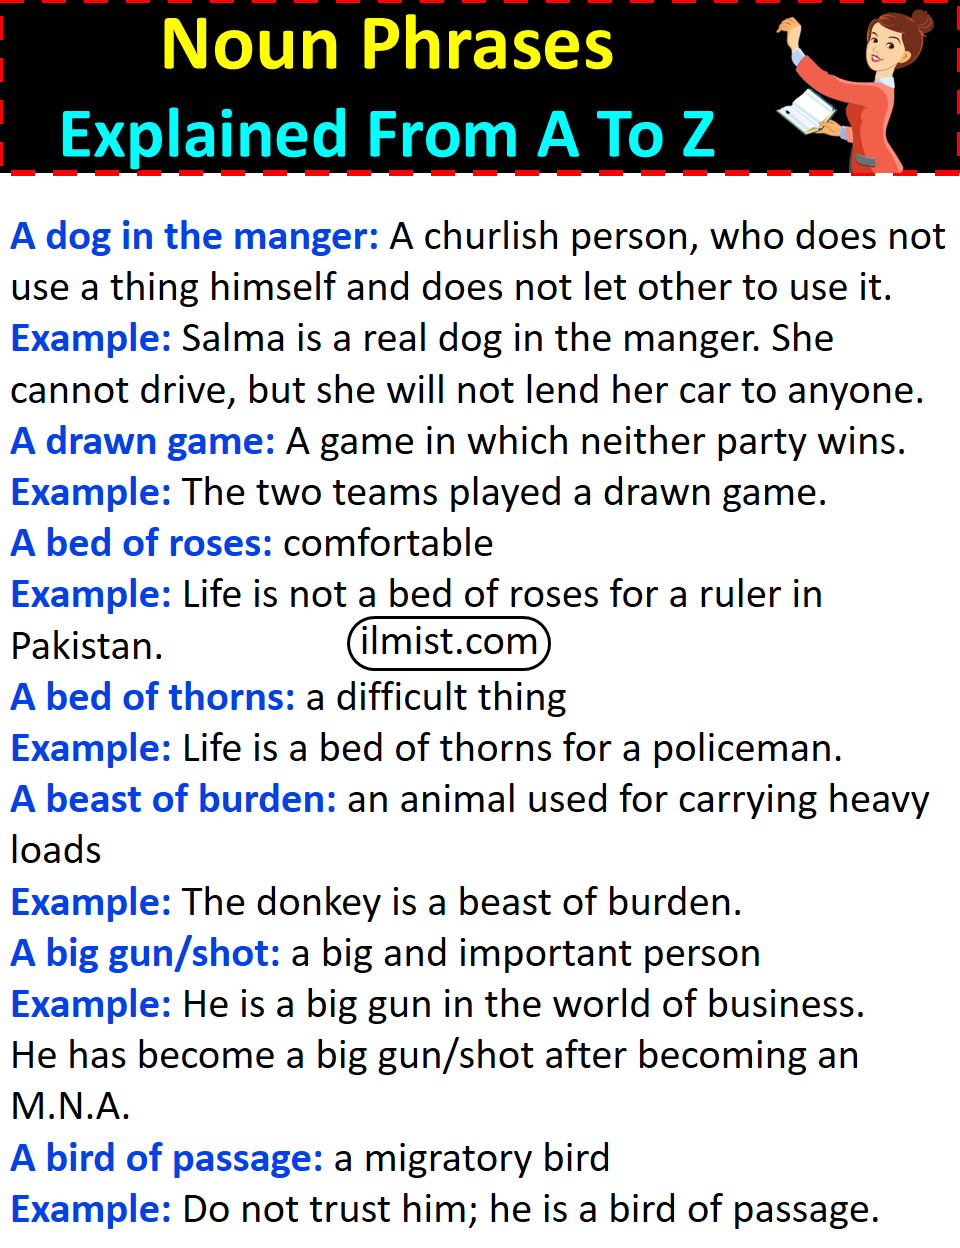 A To Z Noun Phrases Explained In English With Examples